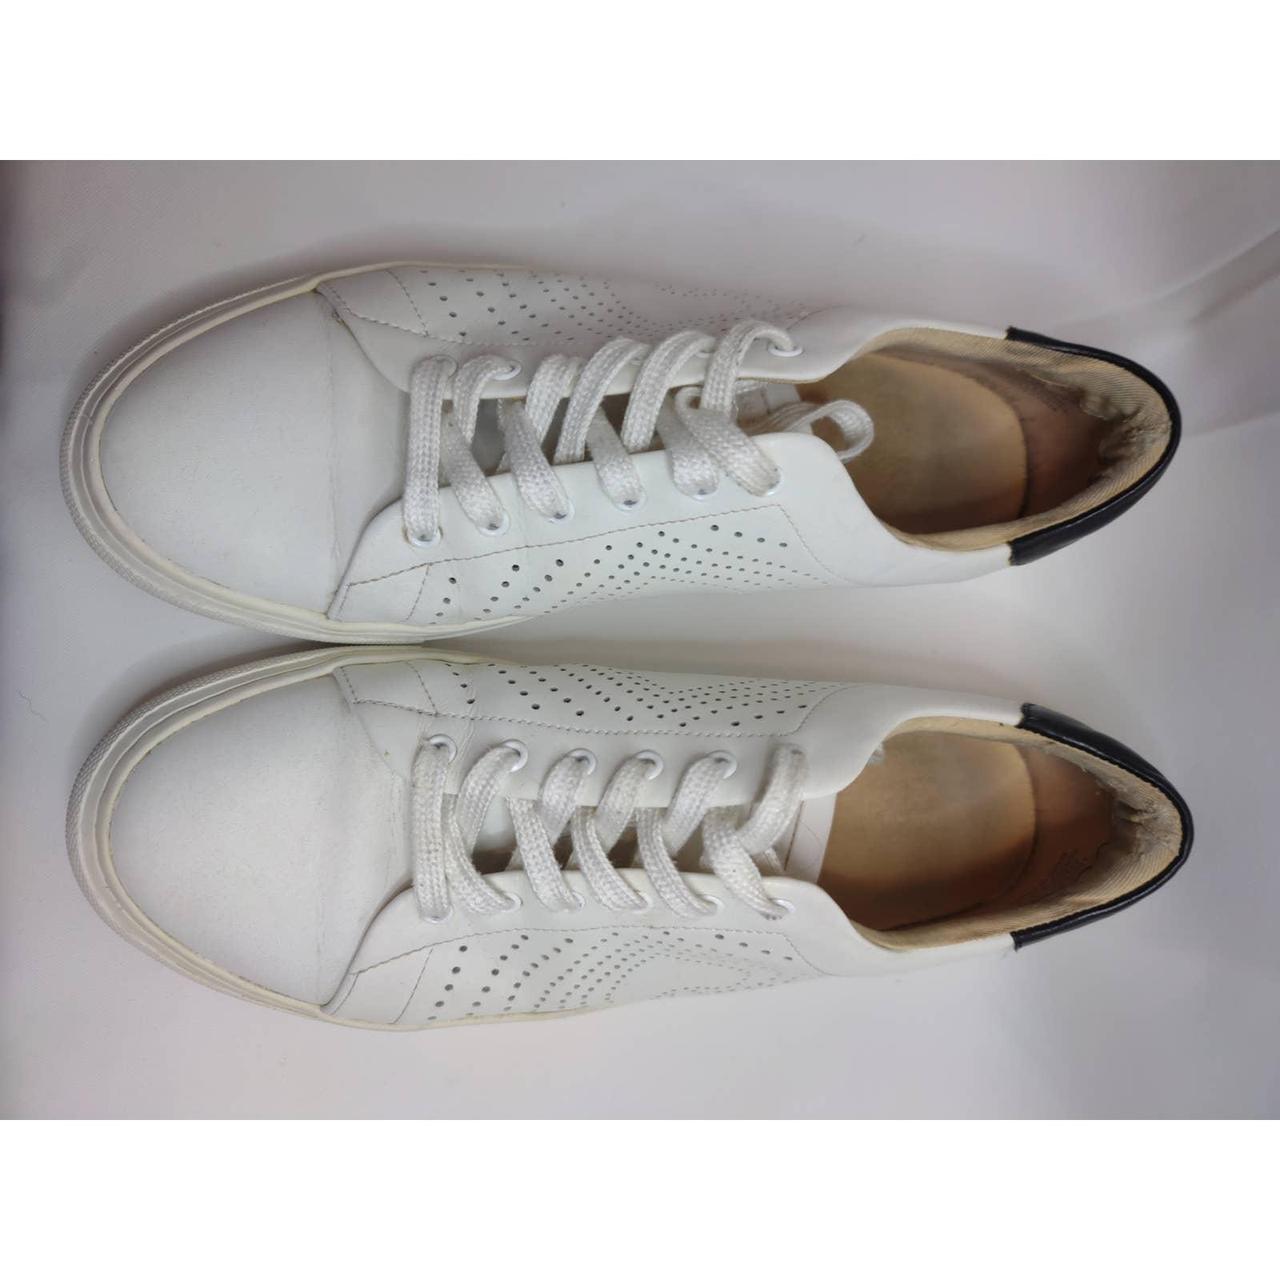 Kate Spade New York Women's White and Black Trainers | Depop